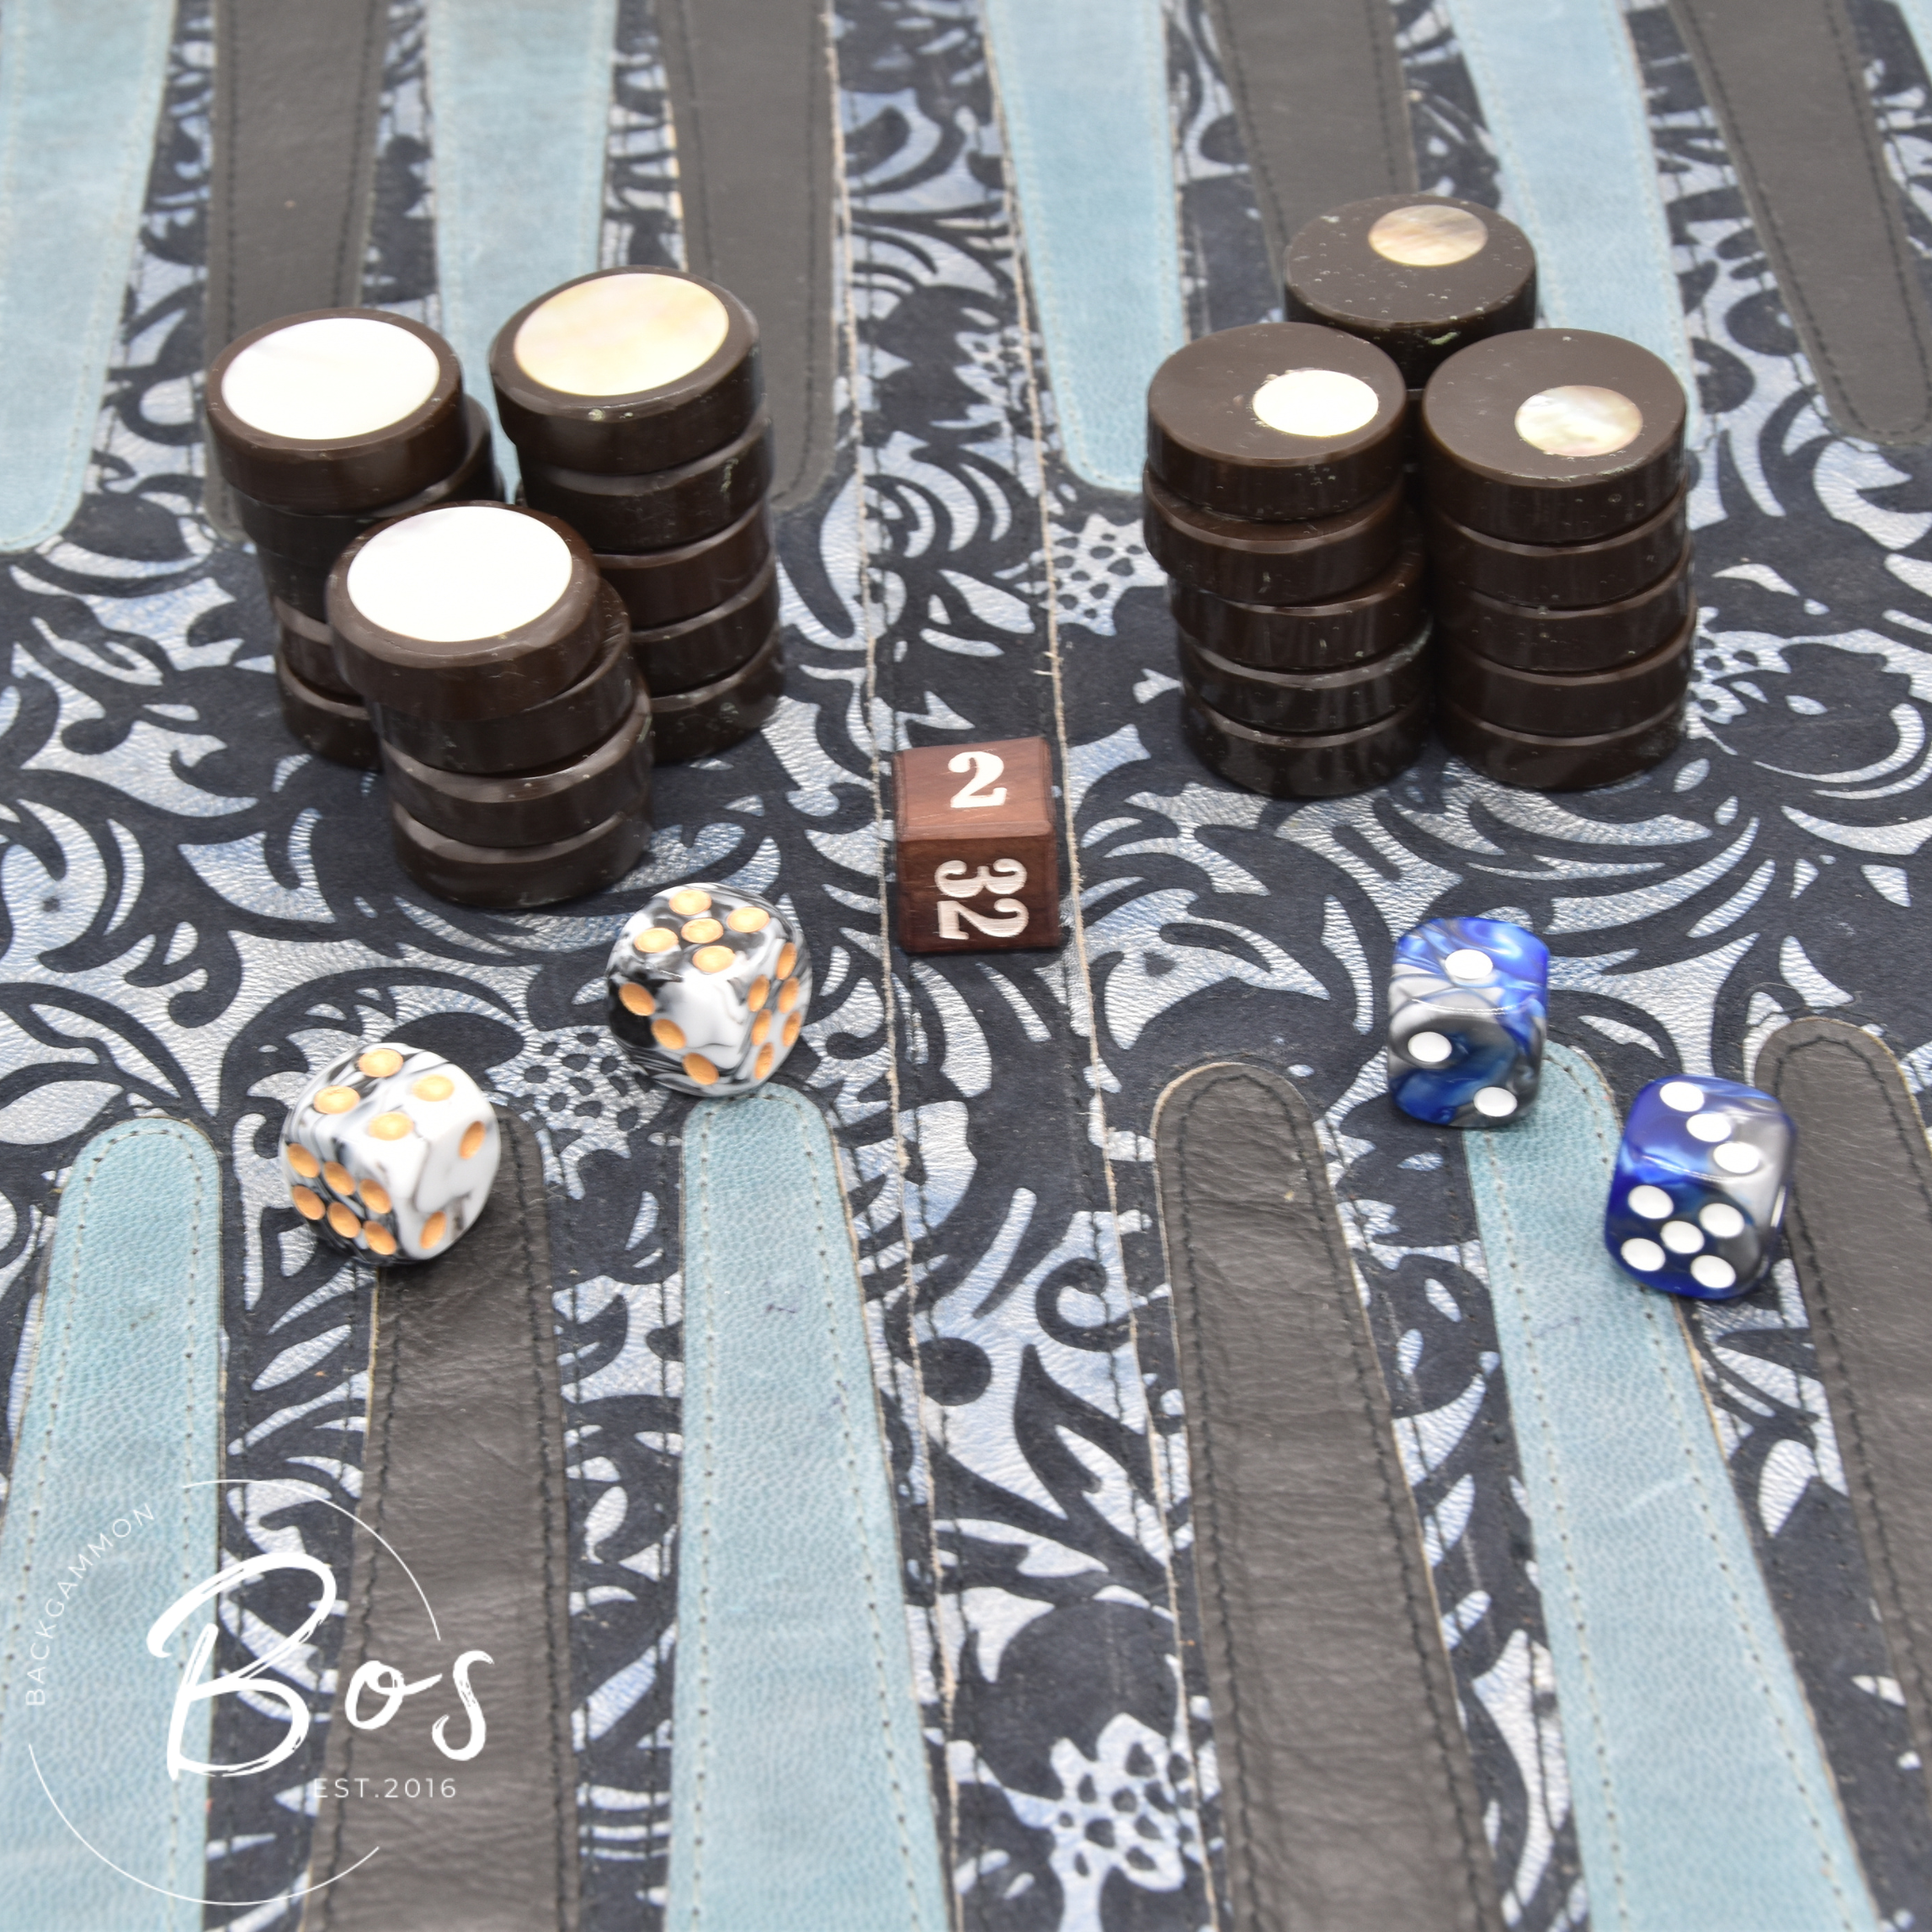 Engraved Blue leather backgammon set with resin checkers